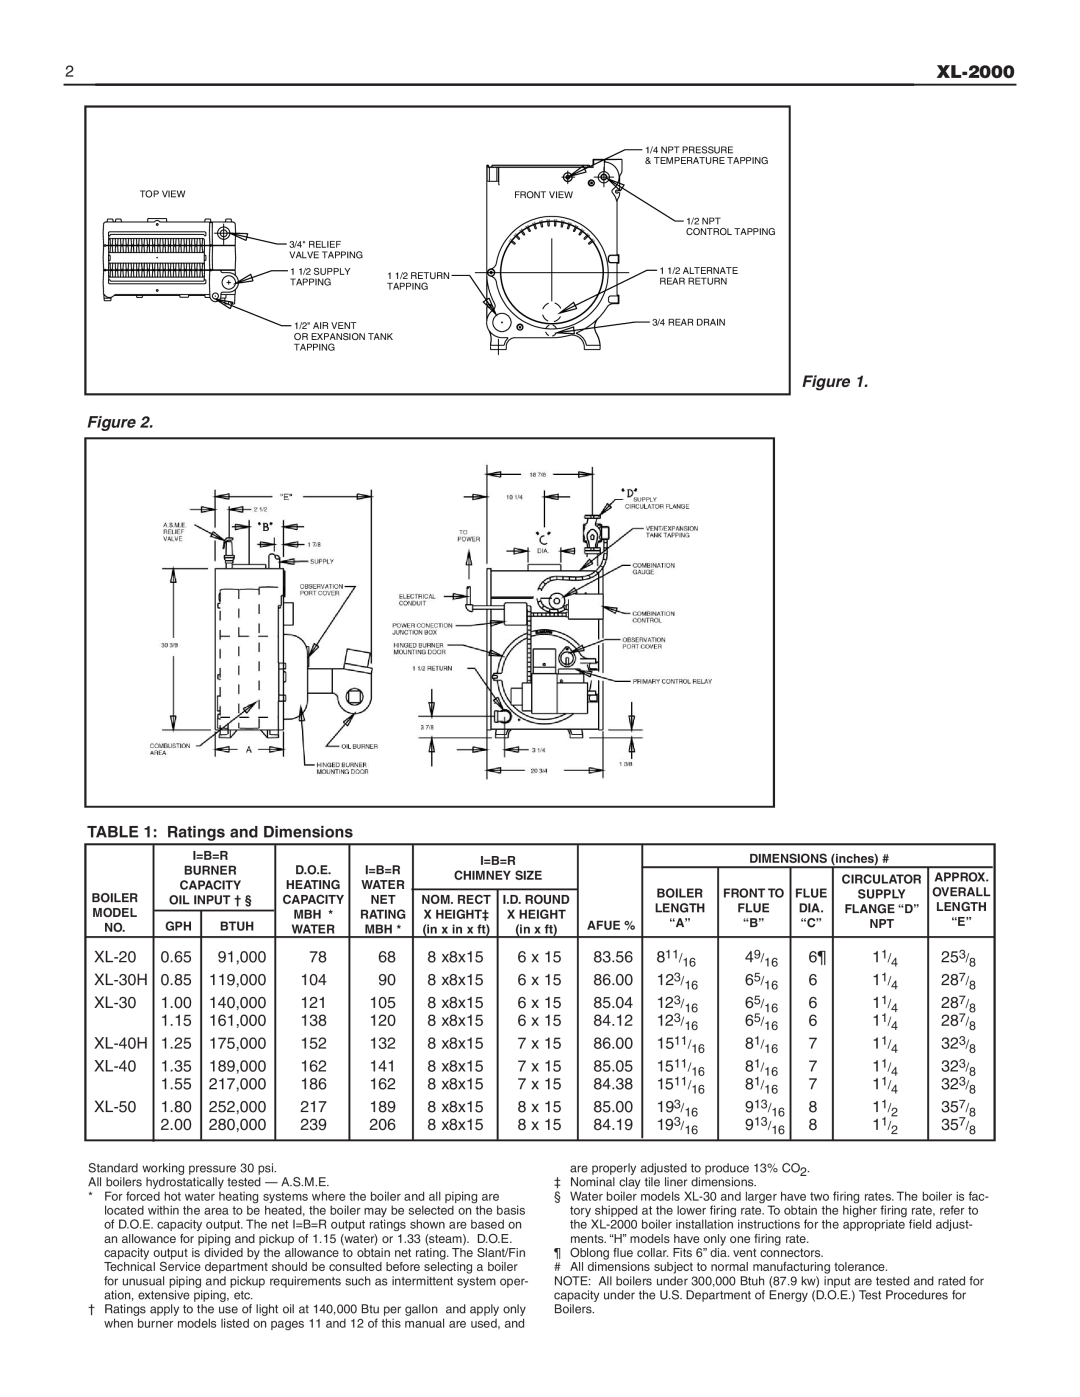 Slant/Fin XL-2000 dimensions Ratings and Dimensions 